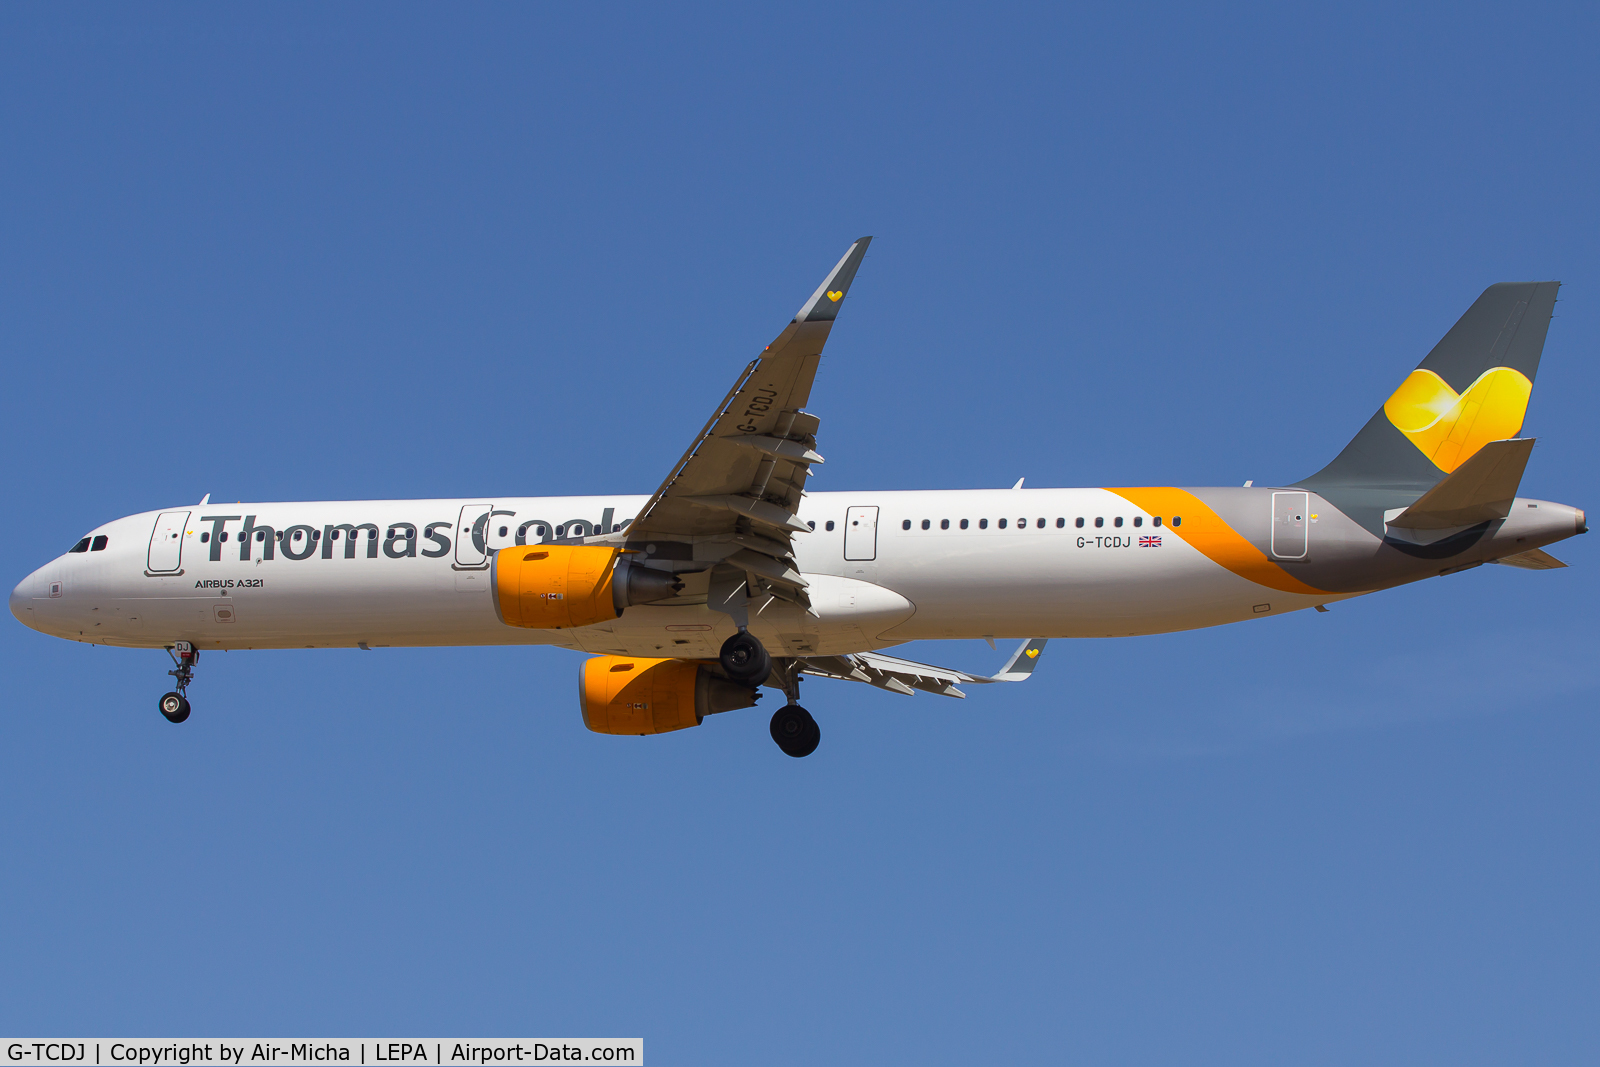 G-TCDJ, 2015 Airbus A321-211 C/N 6526, Thomas Cook Airlines